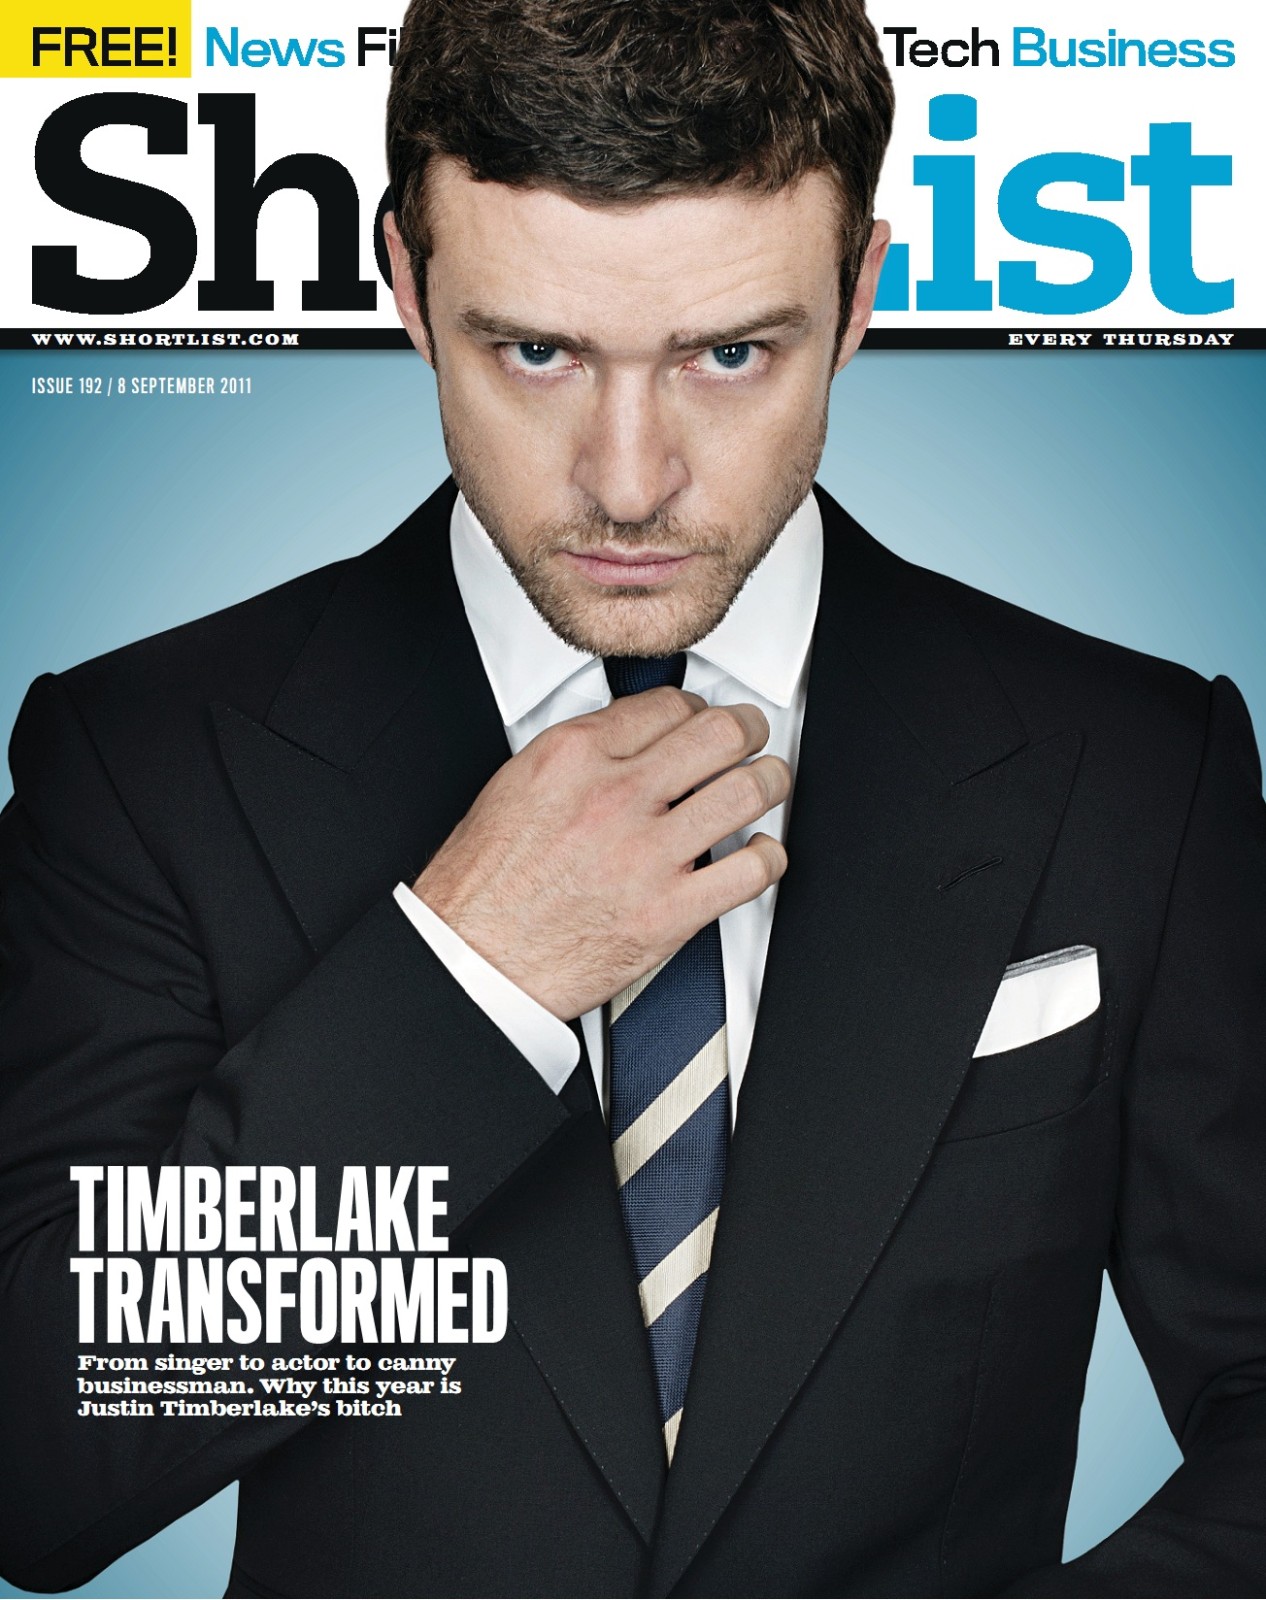 Kate Winslet romps with Justin Timberlake in their new 